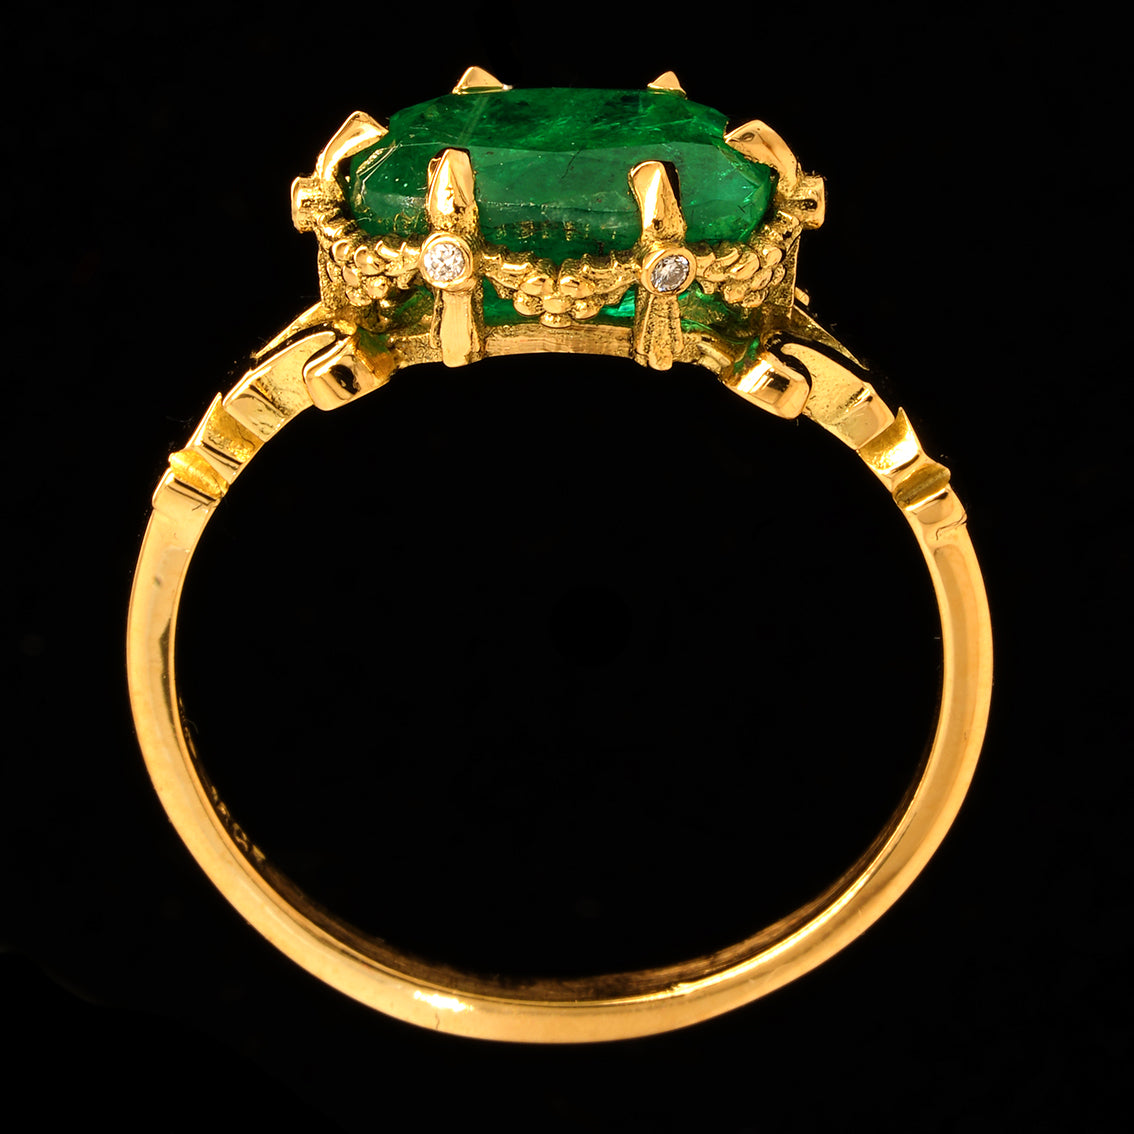 THE EMERALD TABLET RING